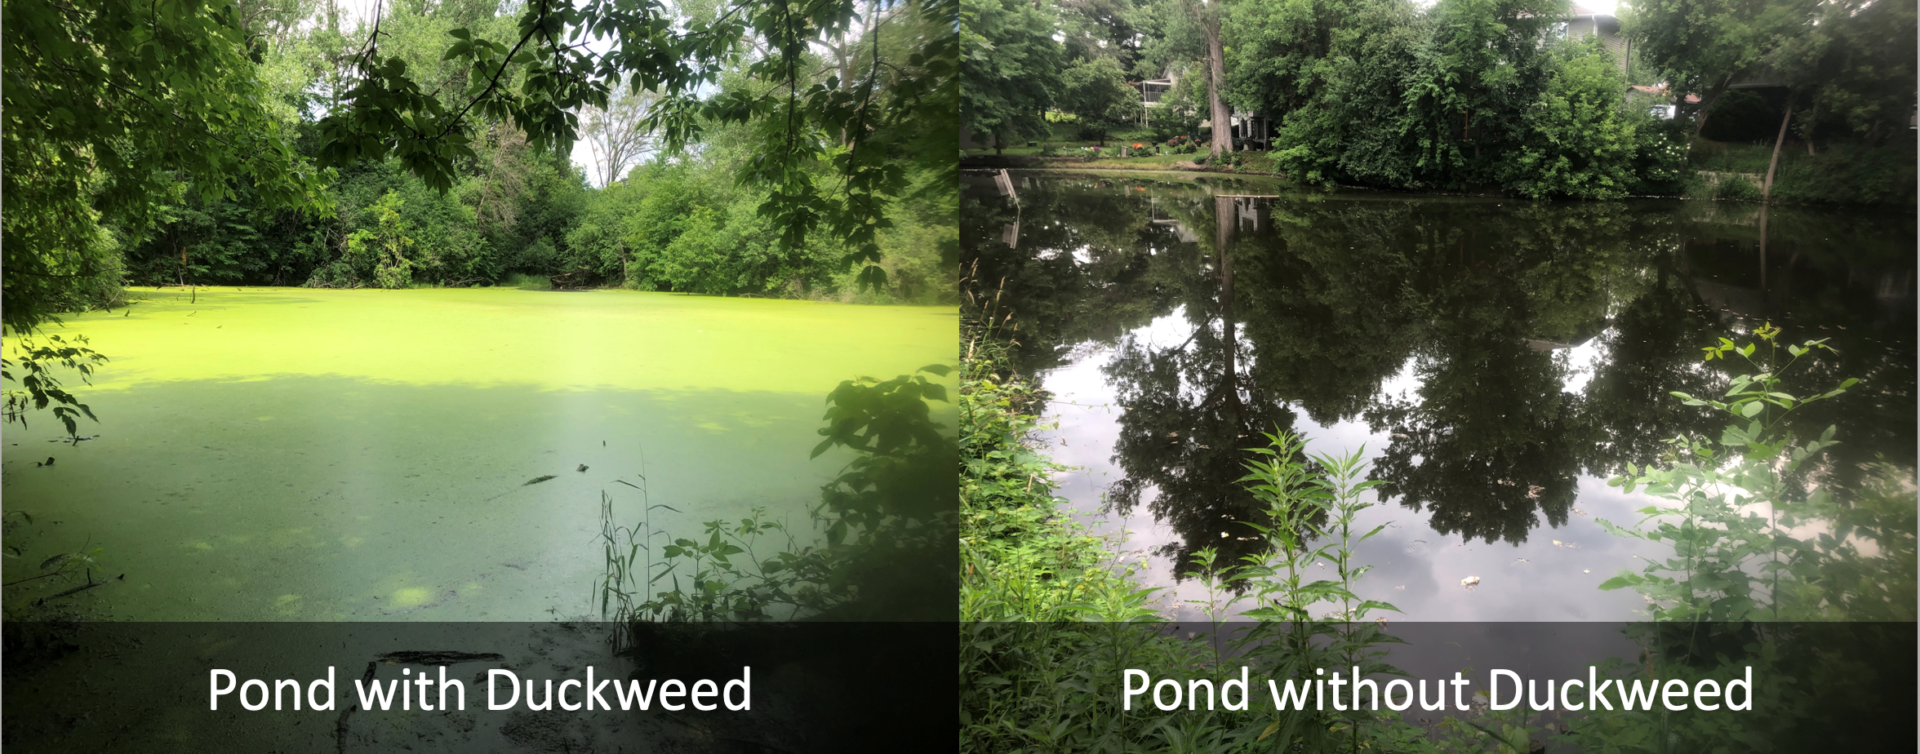 A lake with duckweed vs a lake without duckweed